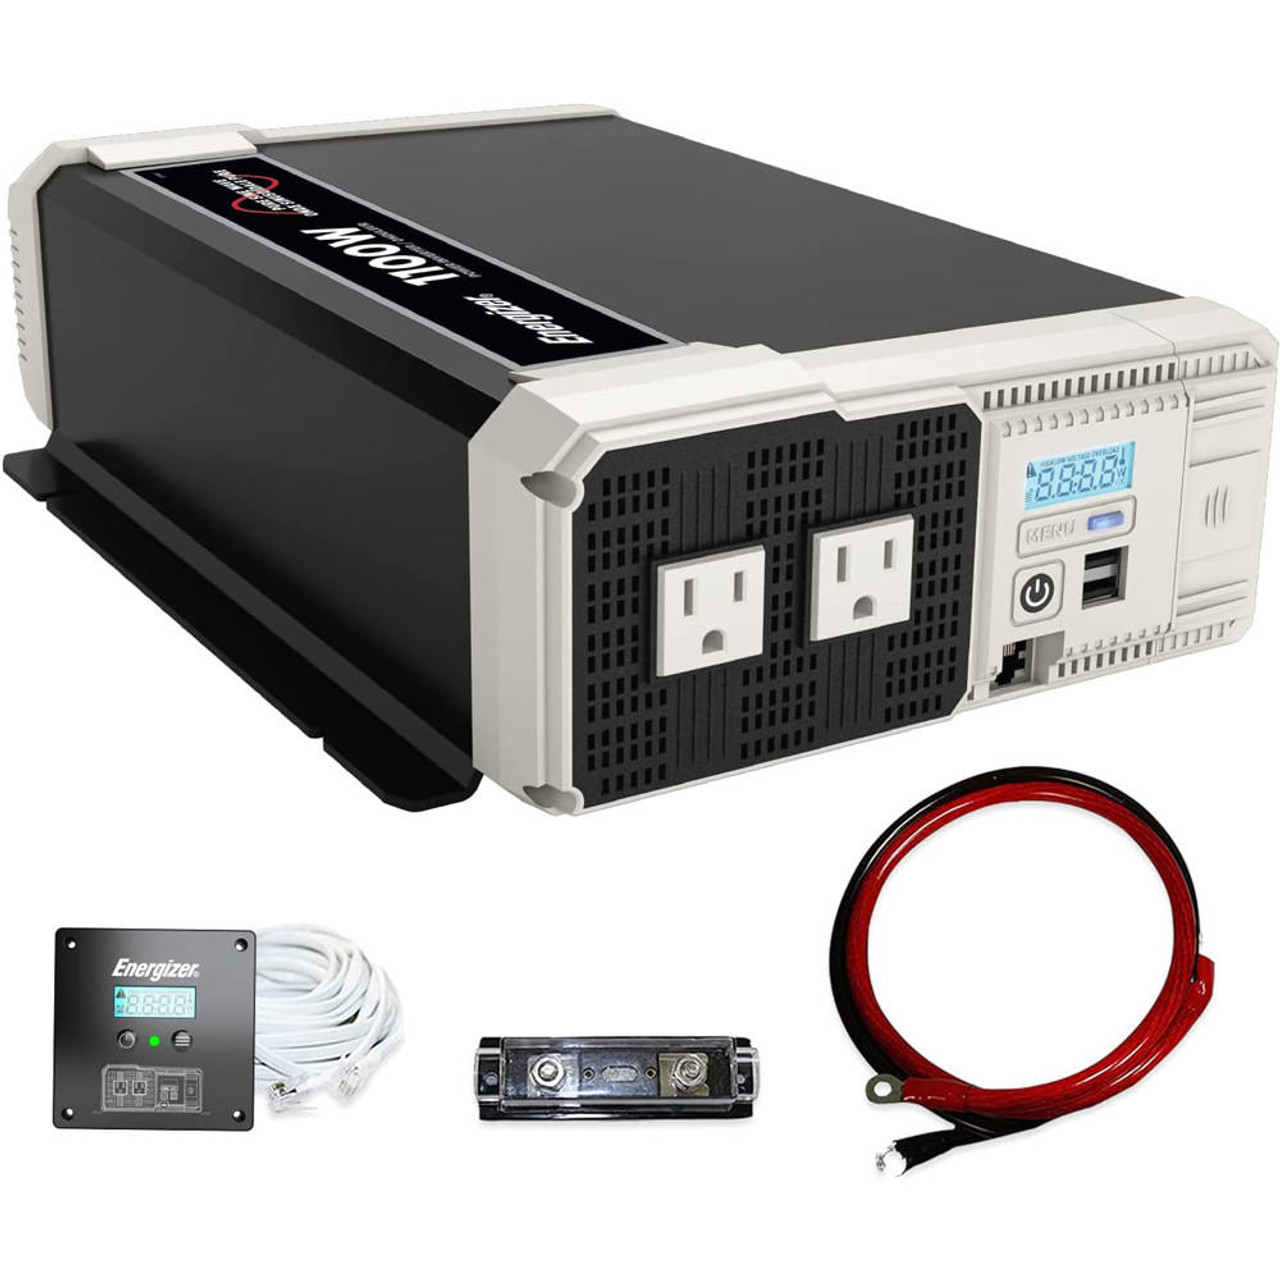 Energizer EP1500 12 DC To AC Inverter 1500W